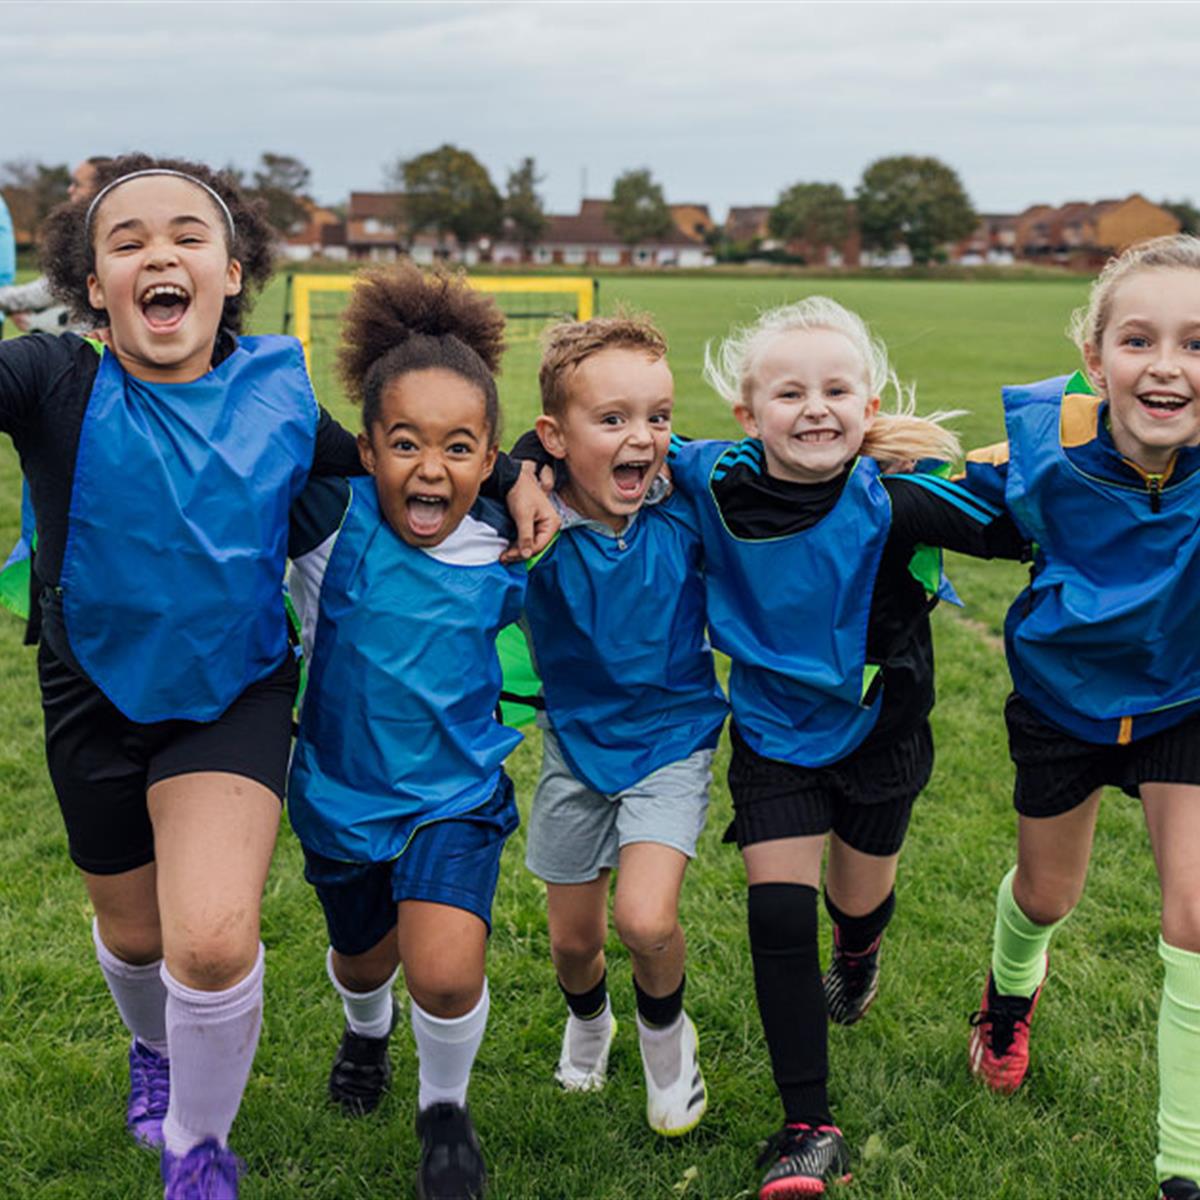 Children's high-impact sports can be abuse – experts explain why